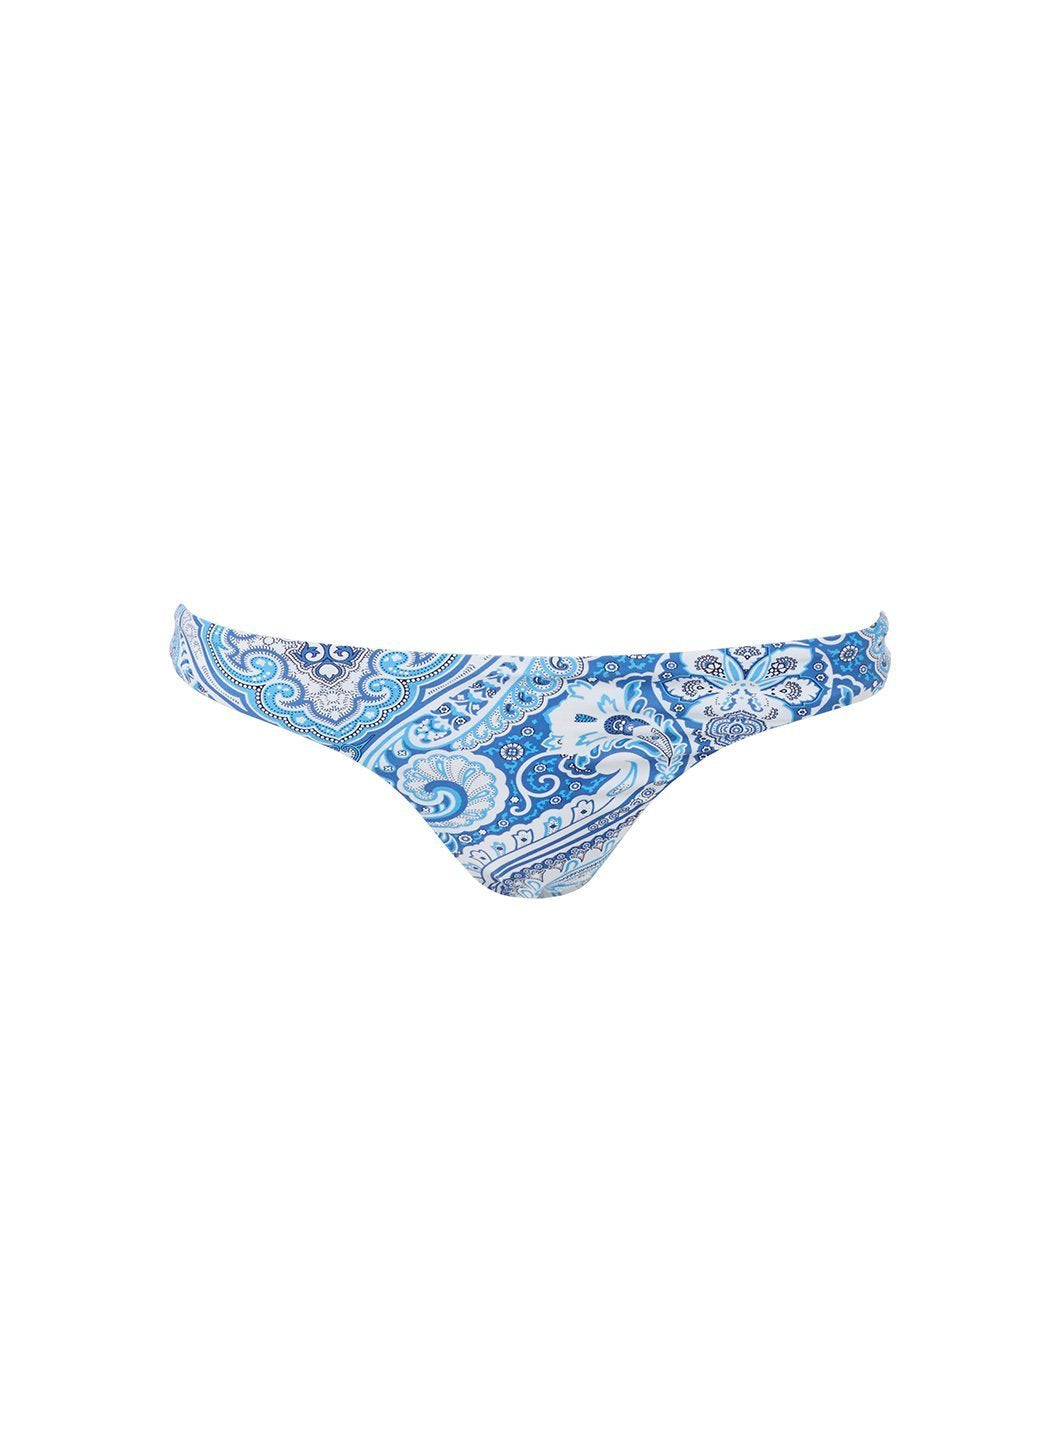 Melissa Odabash Barbados Blue Paisley Underwired Cup Bandeau Bikini Official Website